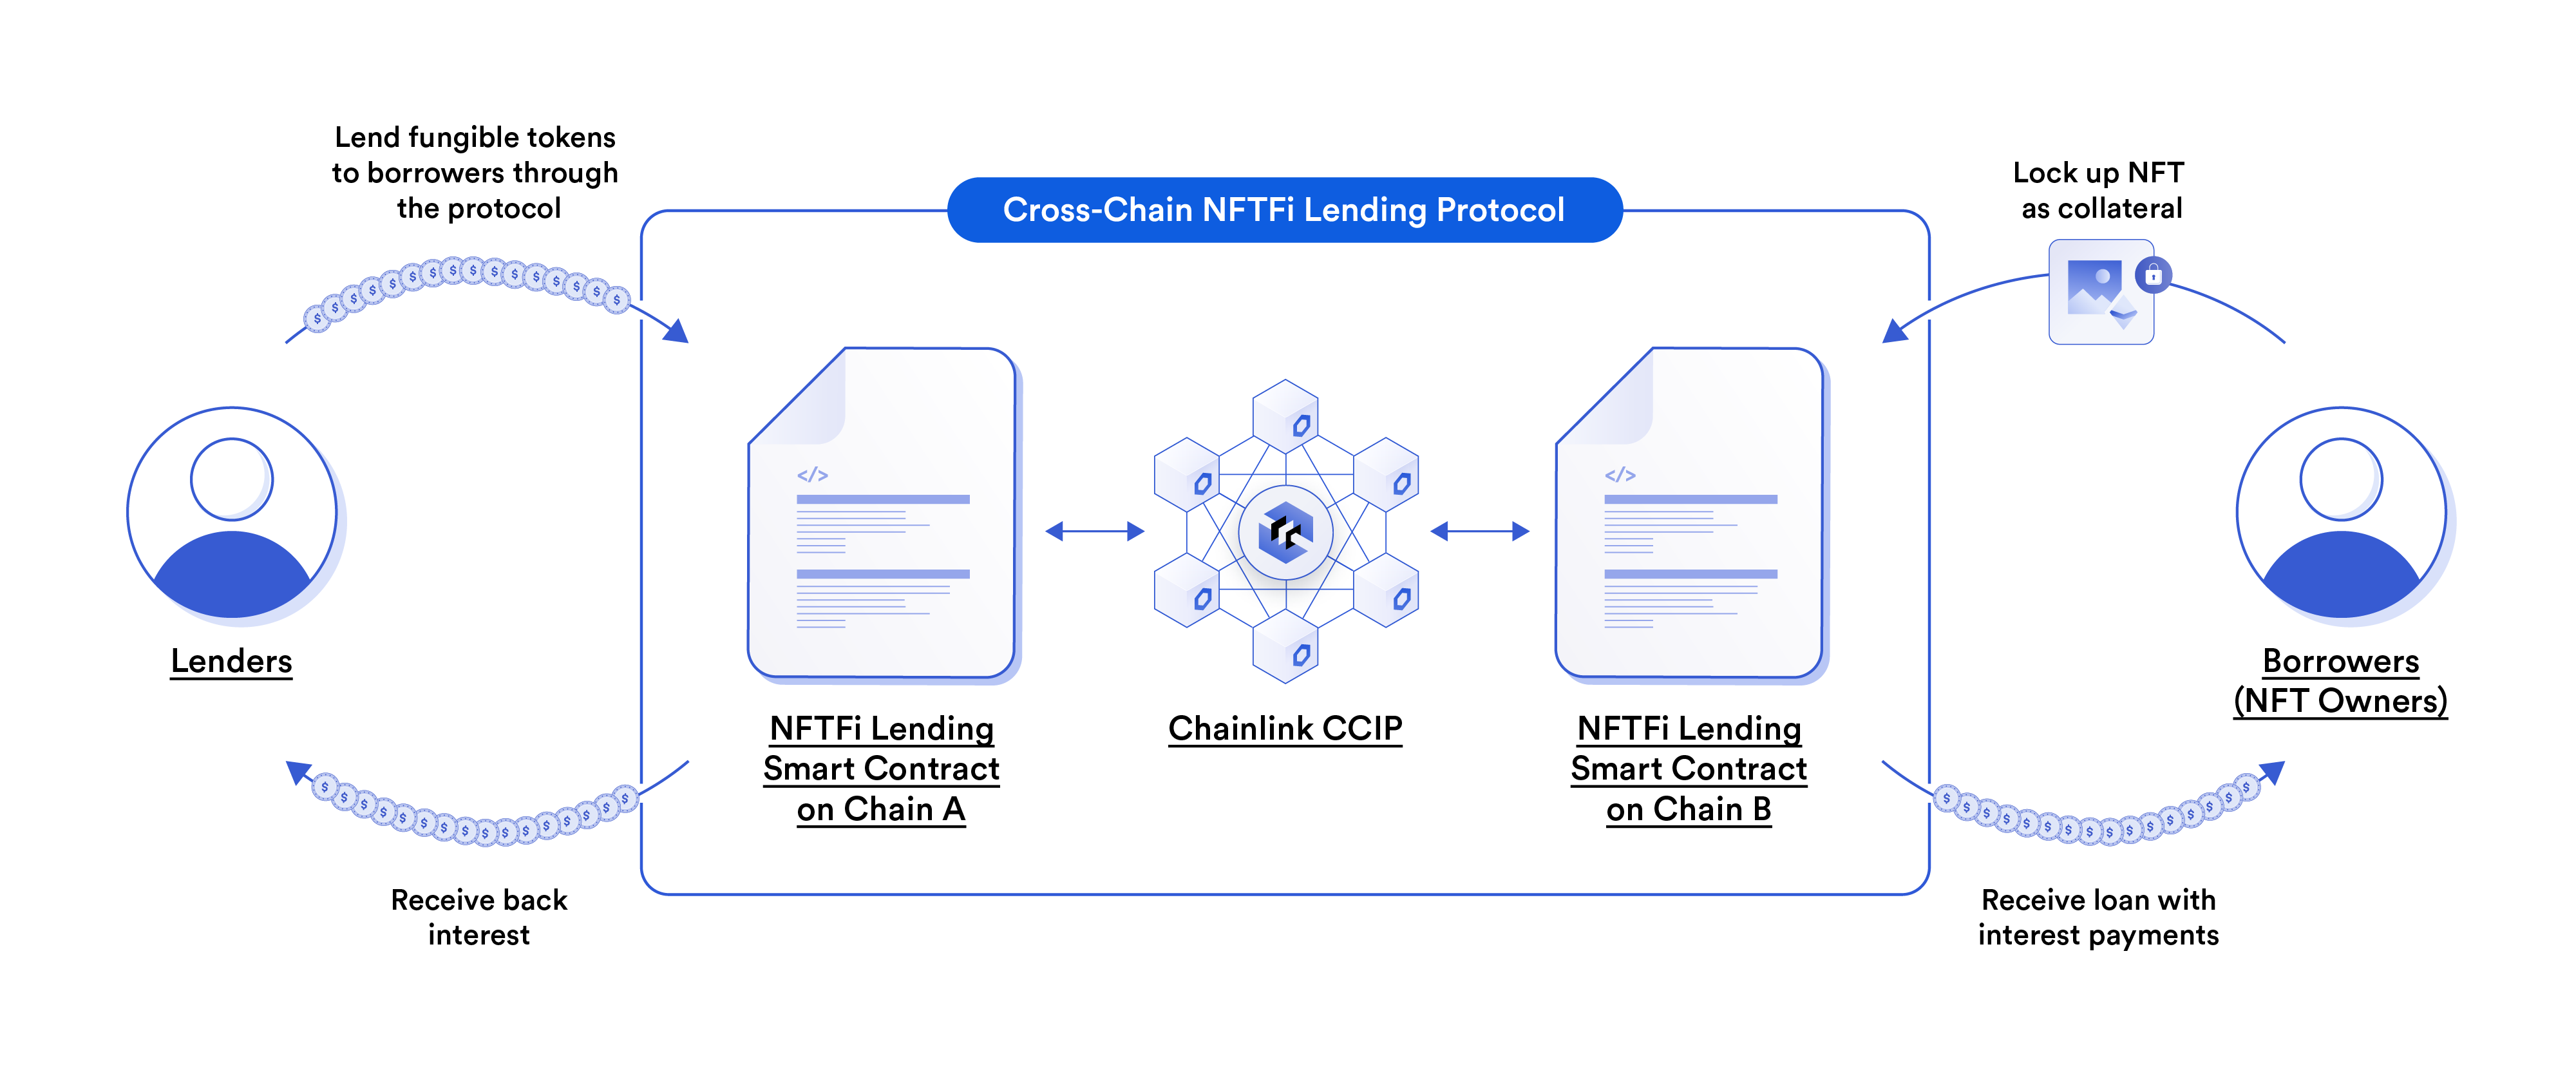 A diagram showing how Chainlink CCIP can help power a cross-chain NFTFi lending protocol. 